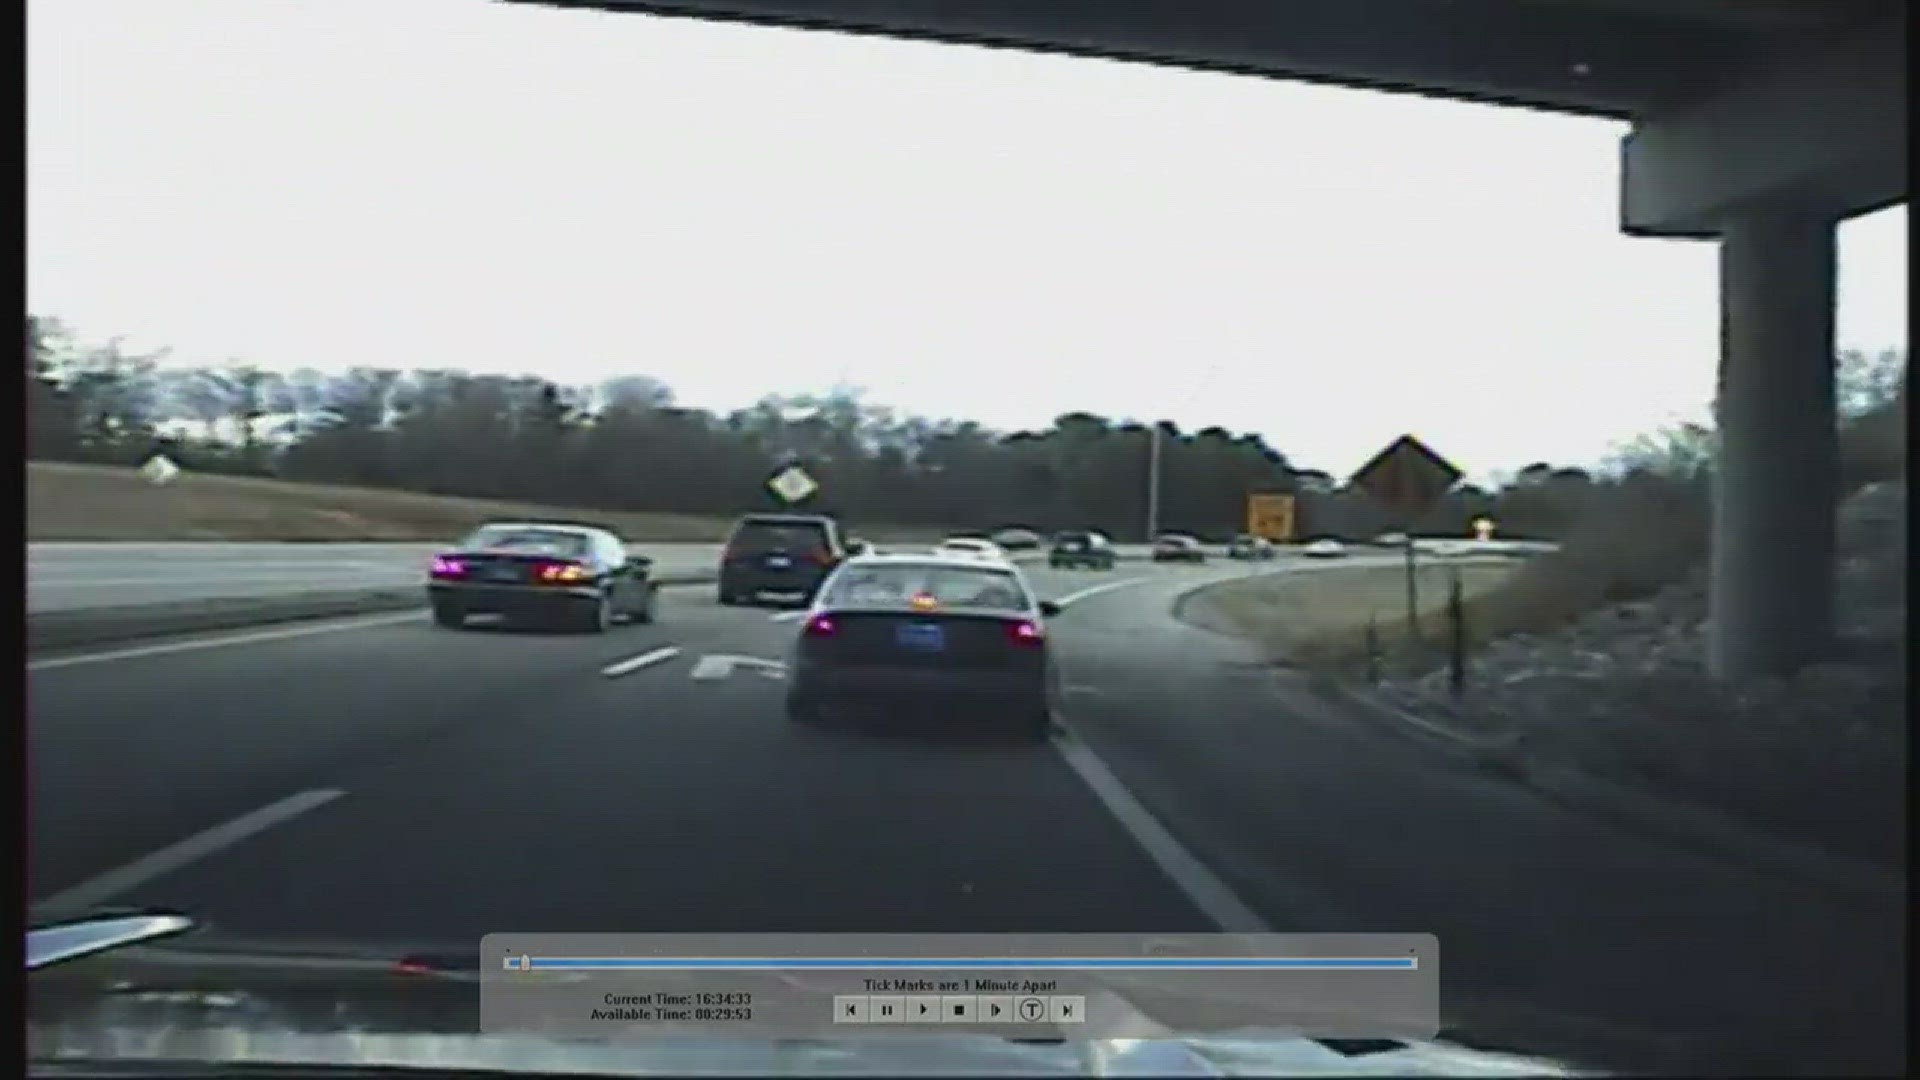 On Jan. 29, THP pursued a driver on a high speed chase from west Knoxville to downtown. This video is from the camera located in the trooper's vehicle.